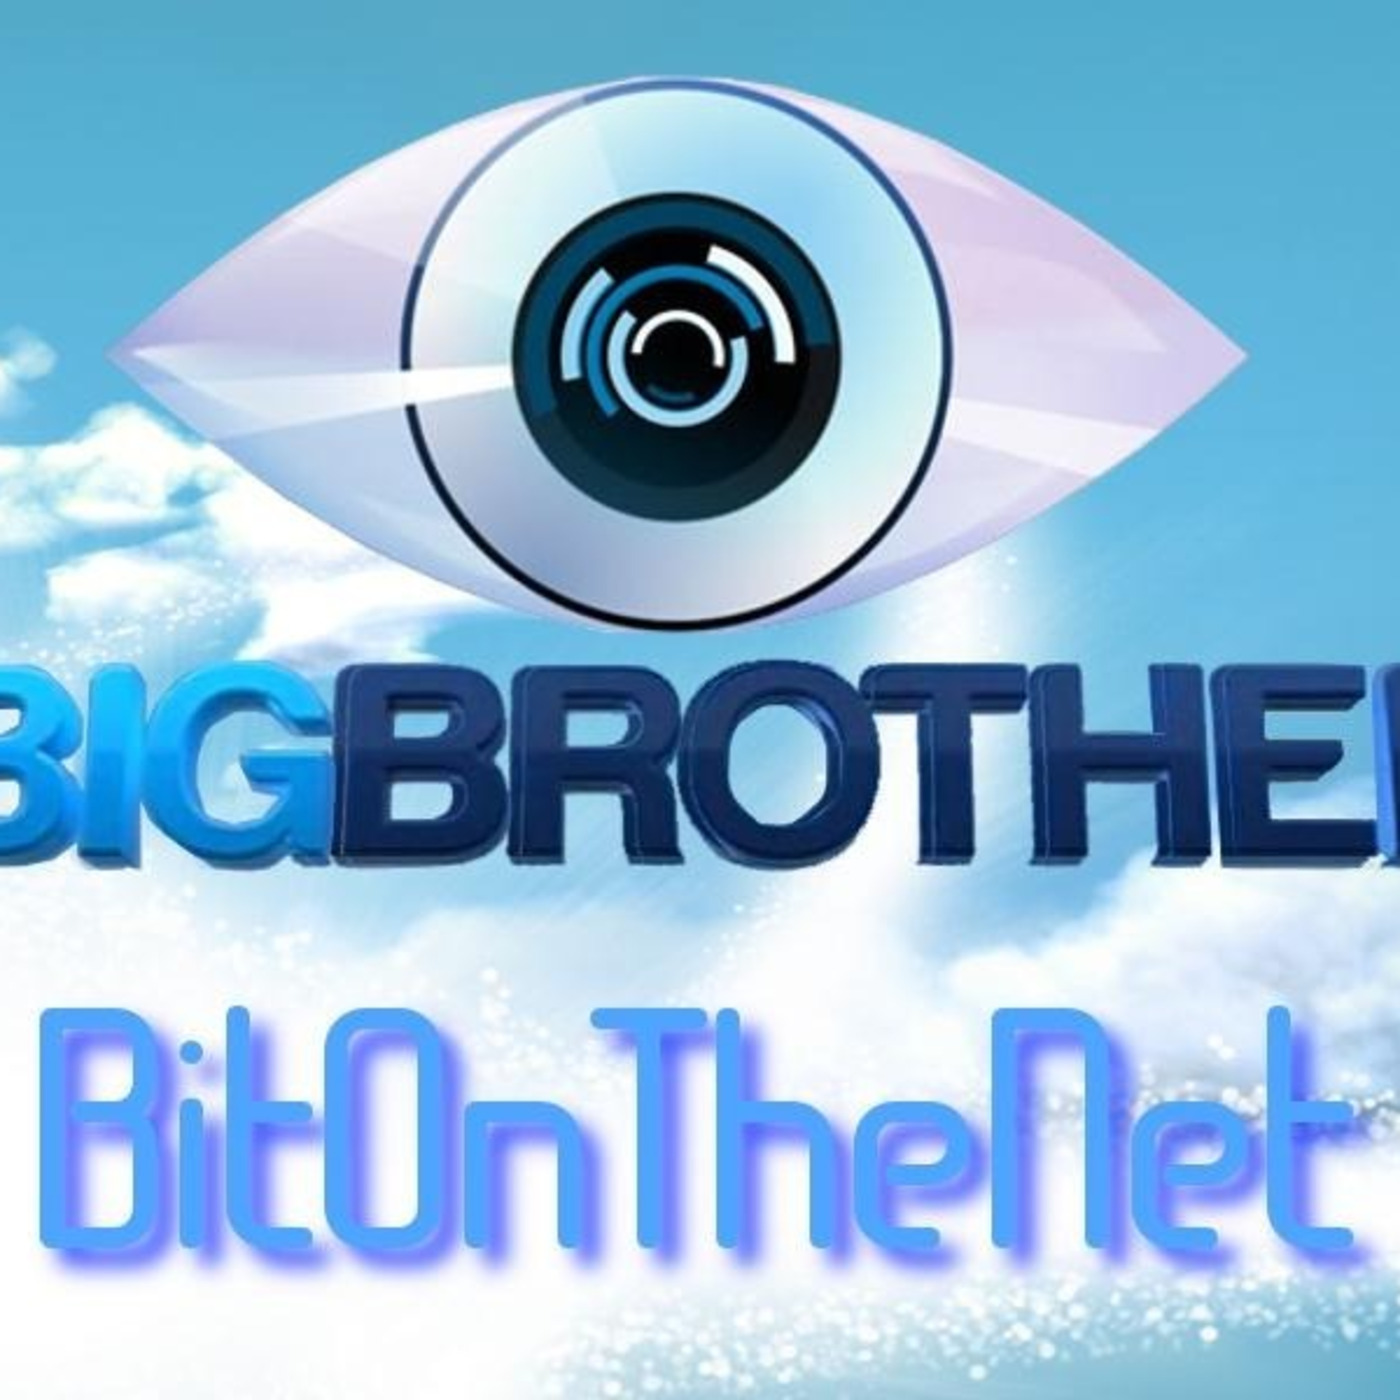 Big Brother's Bit On The Net